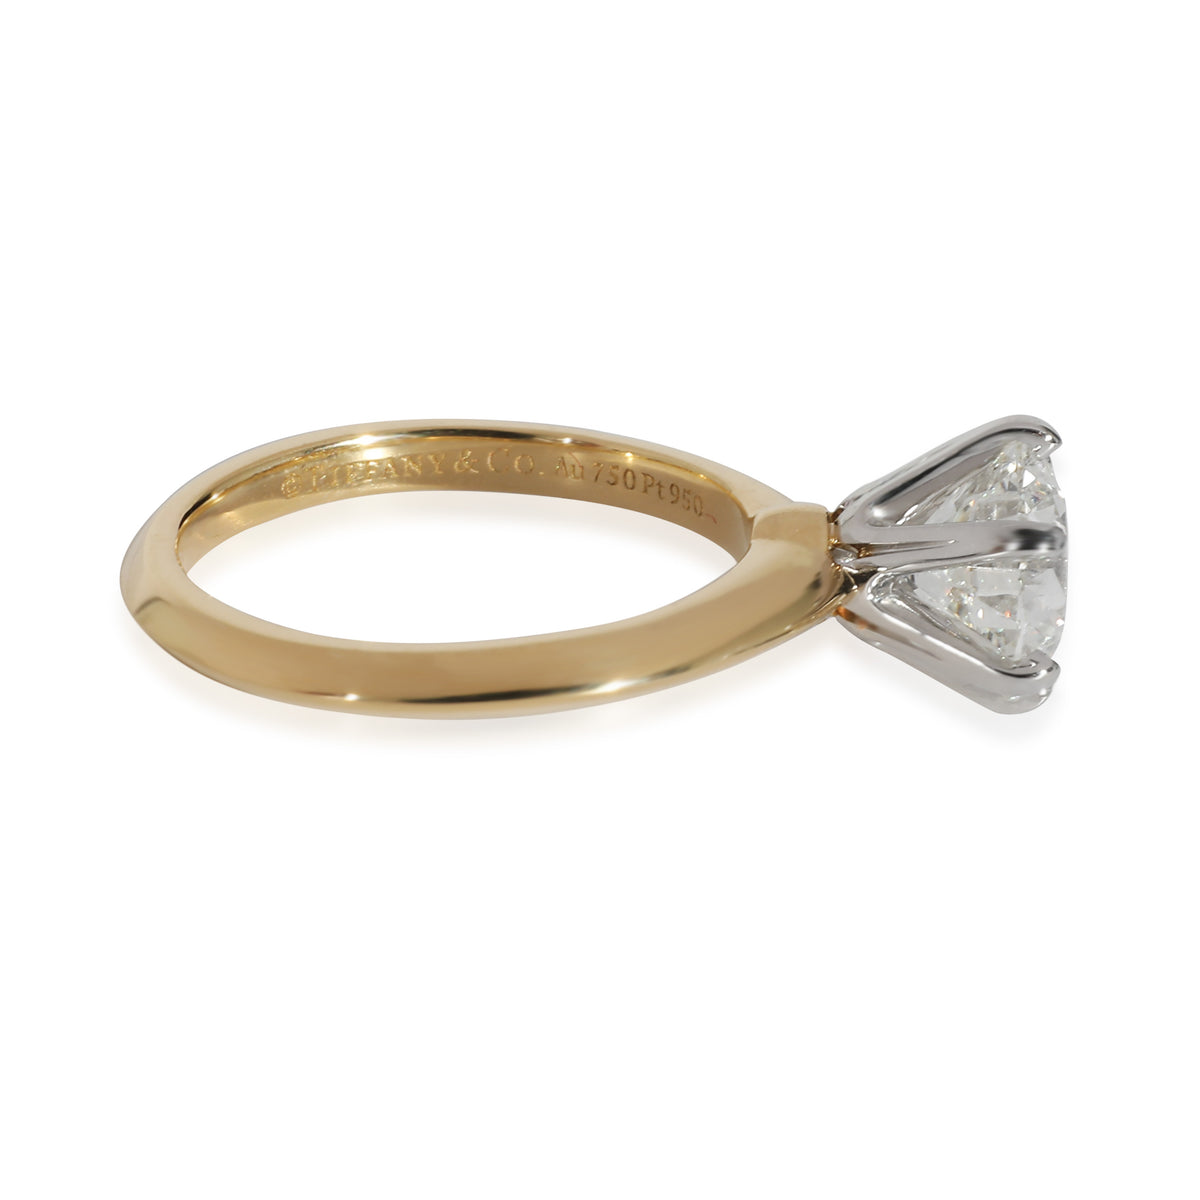 Tiffany & Co. Solitaire Diamond Engagement Ring in 18K Yellow Gold/Plat, 1.69ct